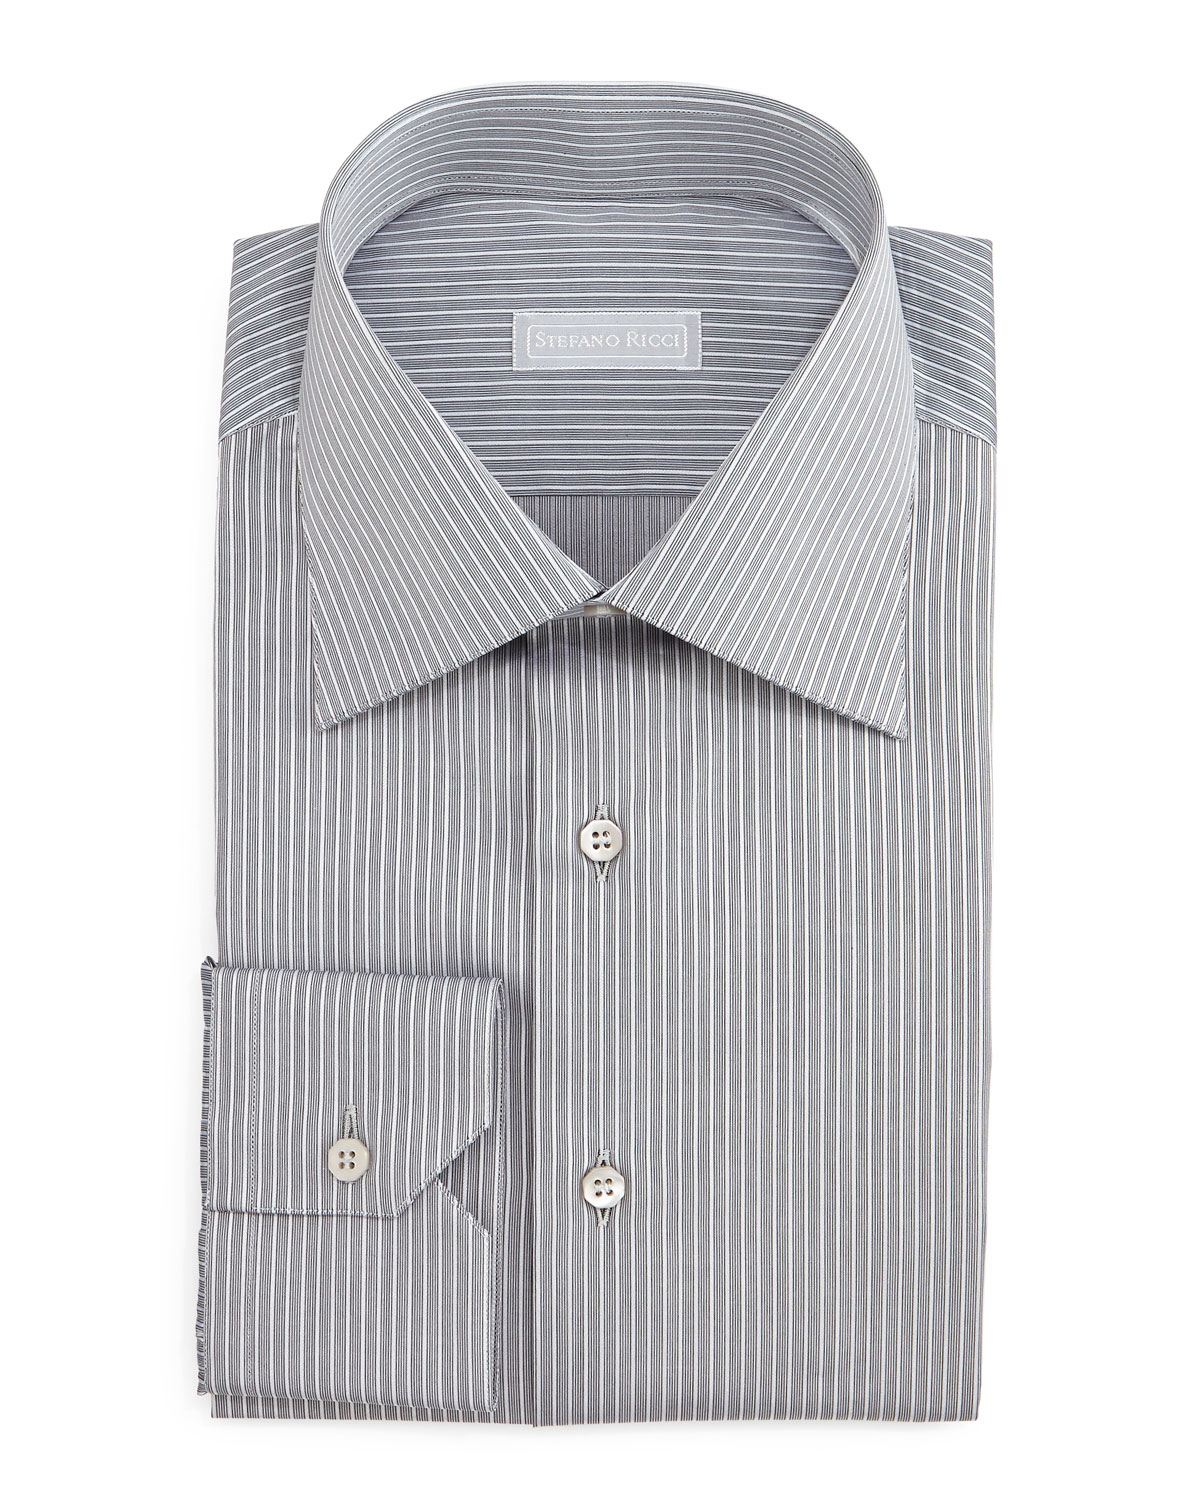 Lyst - Stefano Ricci Striped Woven Dress Shirt in Gray for Men